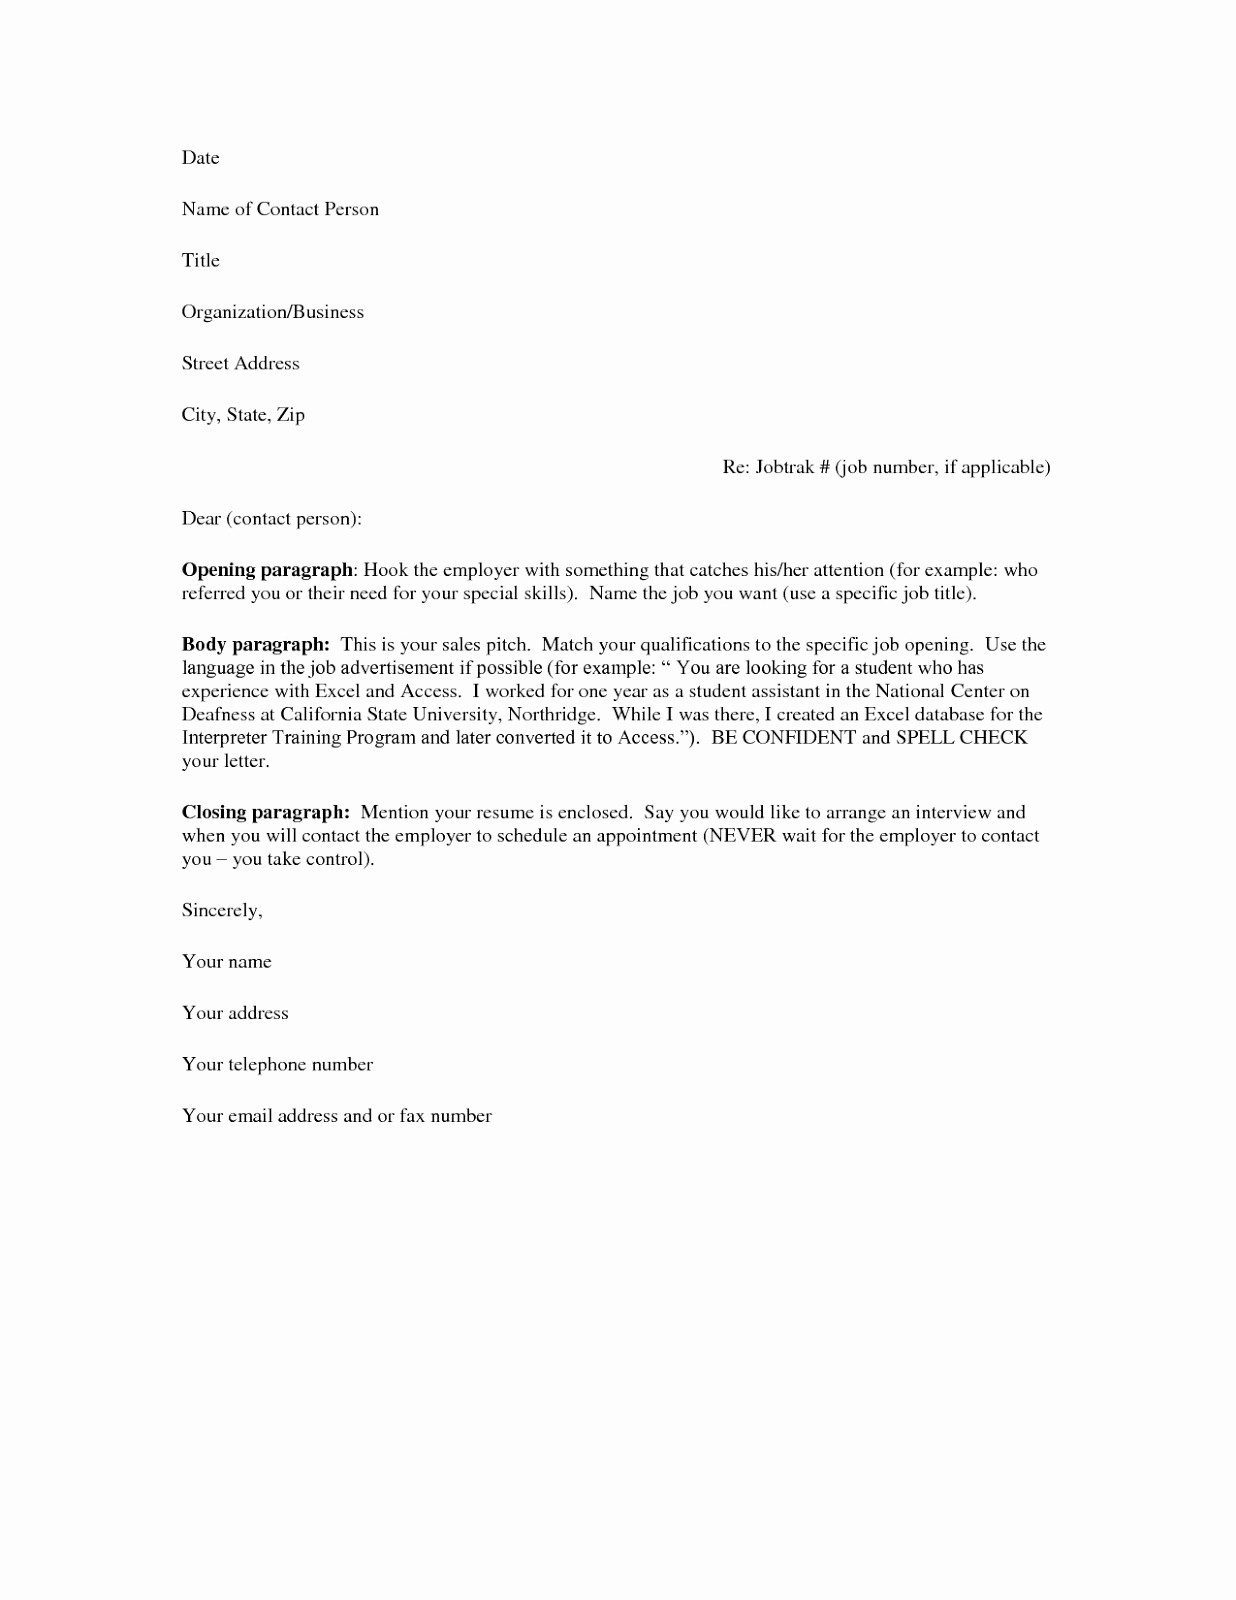 Free Examples Of Cover Letter Beautiful Free Cover Letter Samples for Resumes